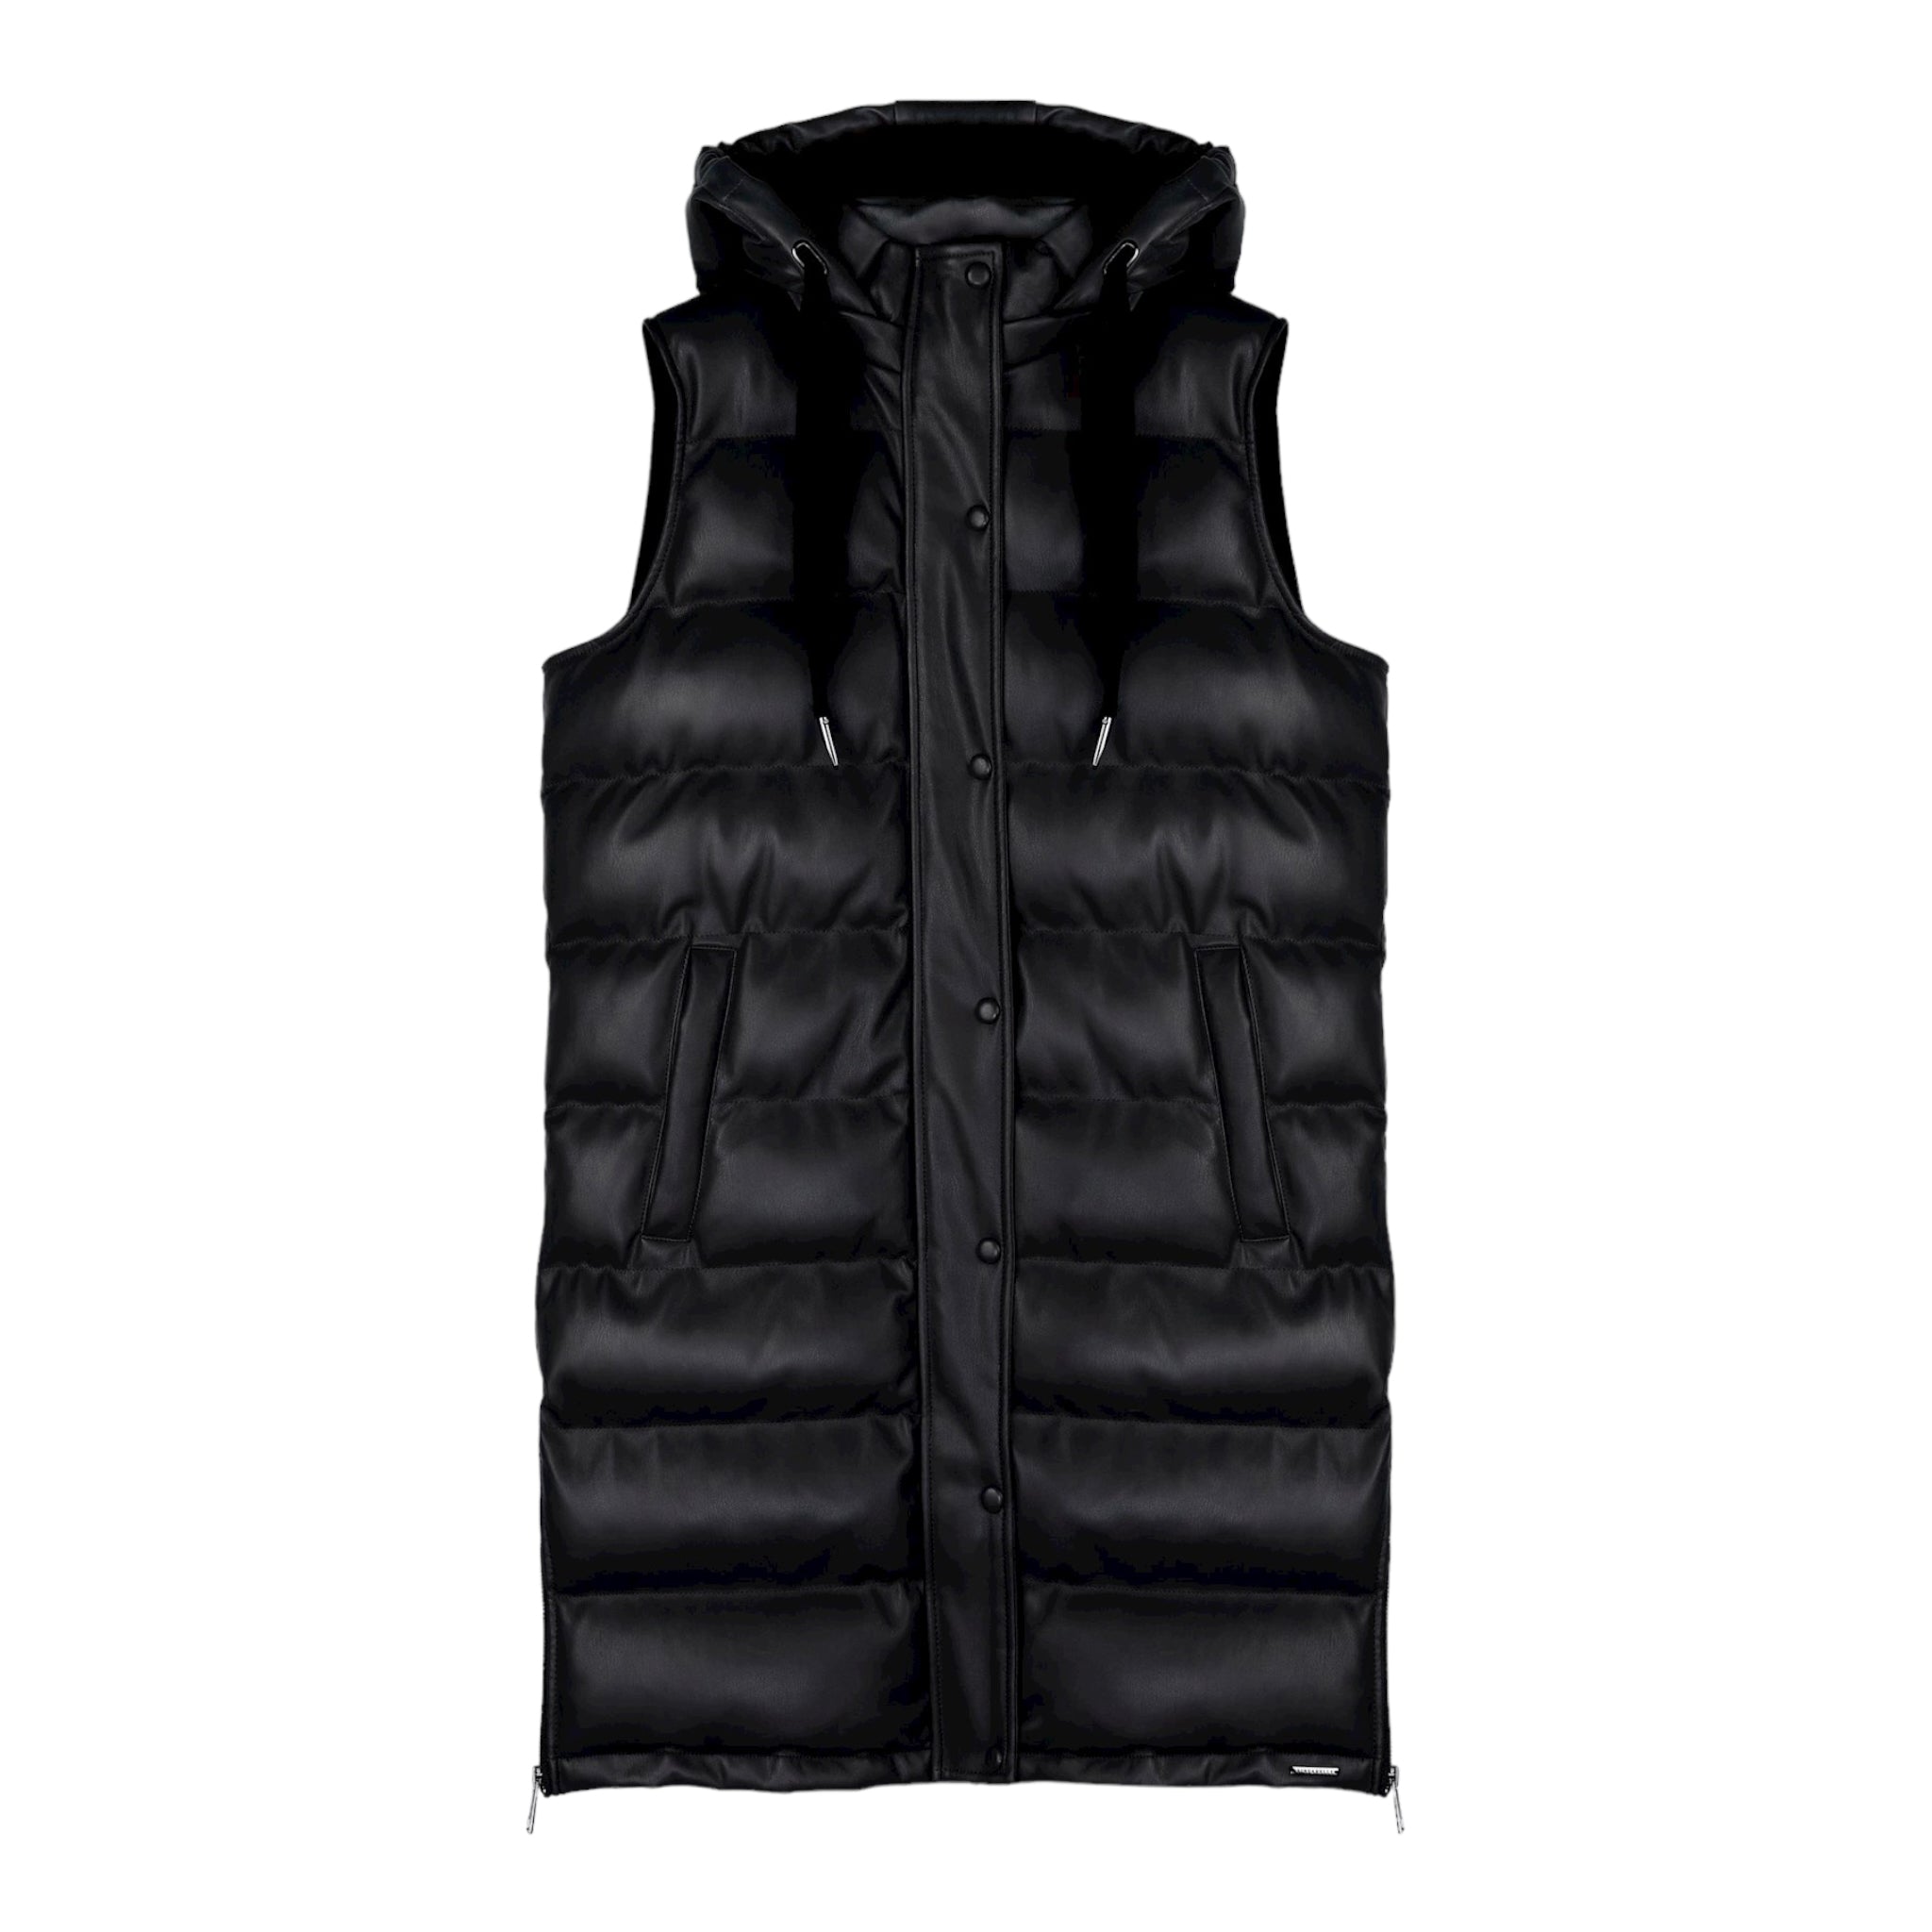 Rino-&-Pelle-Cameron-Faux-Leather-Waistcoat-Black-Product-Image-Front-View